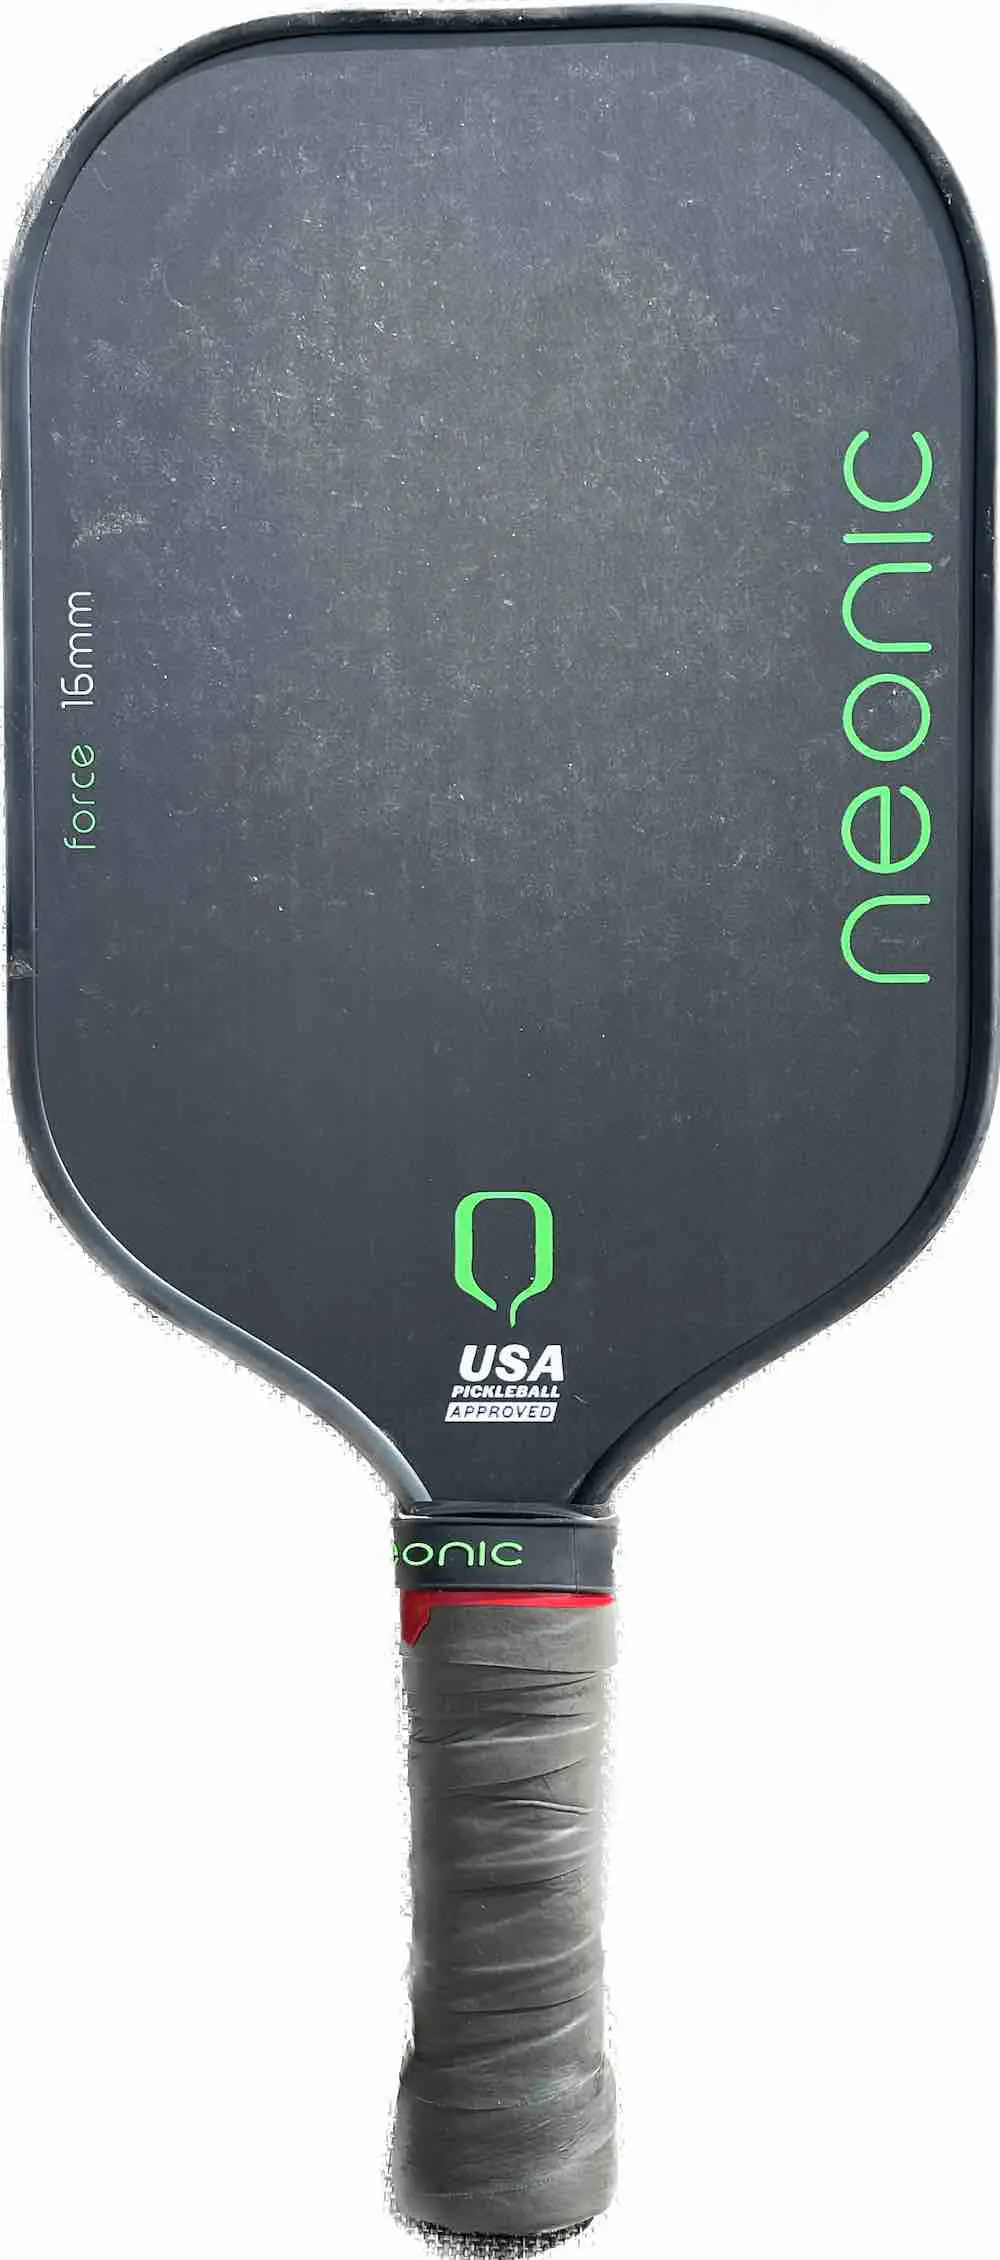 Neonic picleball paddle in green and black 